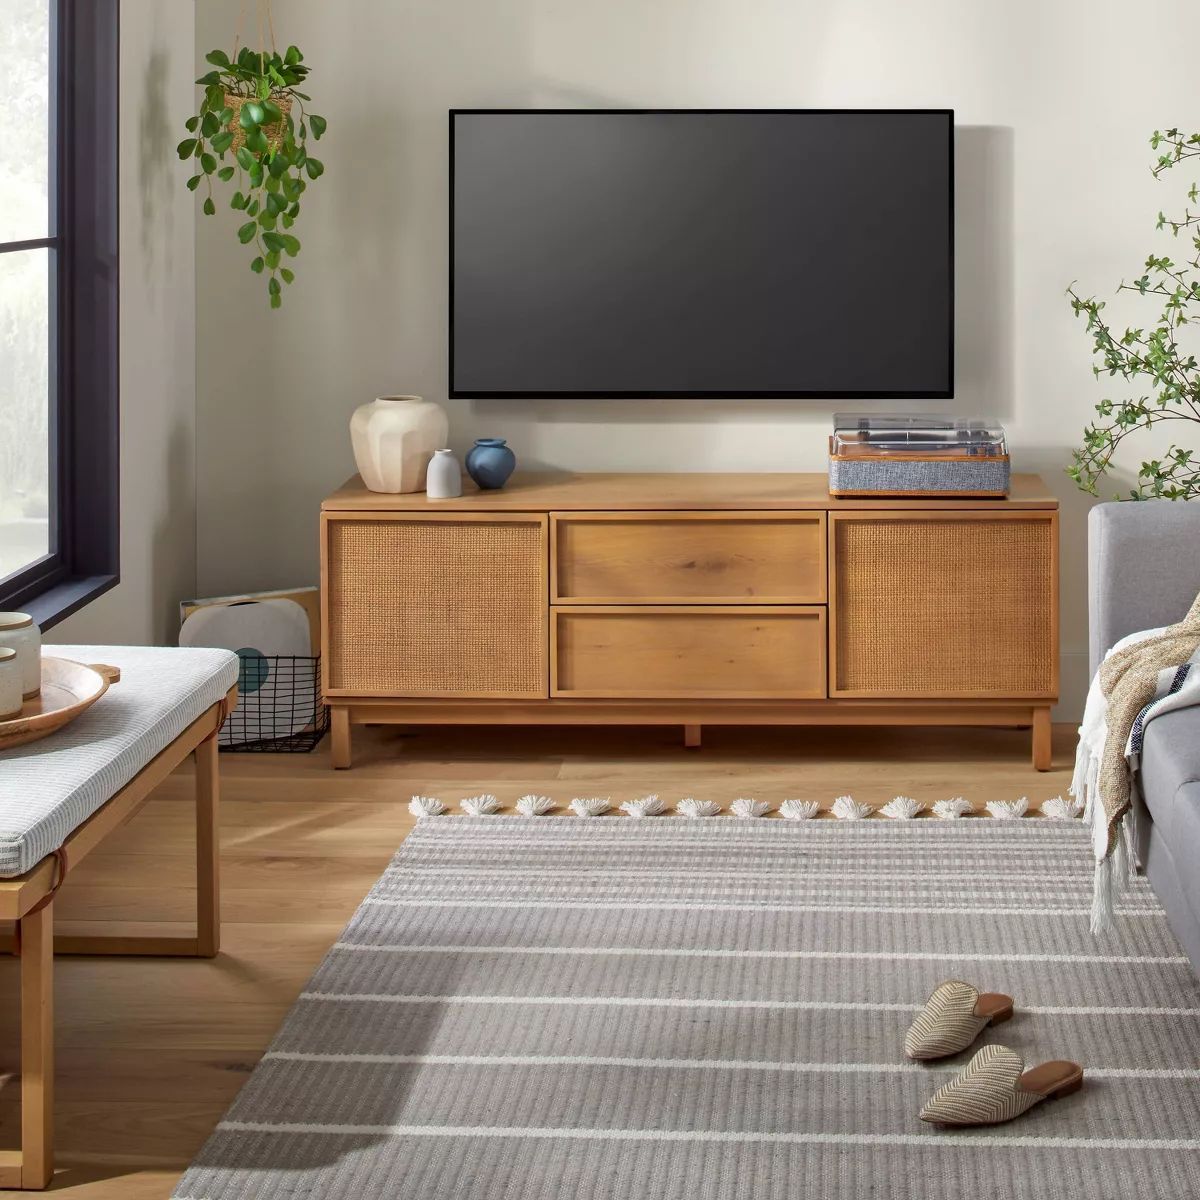 Wood & Cane Transitional Media Console Natural - Hearth & Hand™ with Magnolia | Target